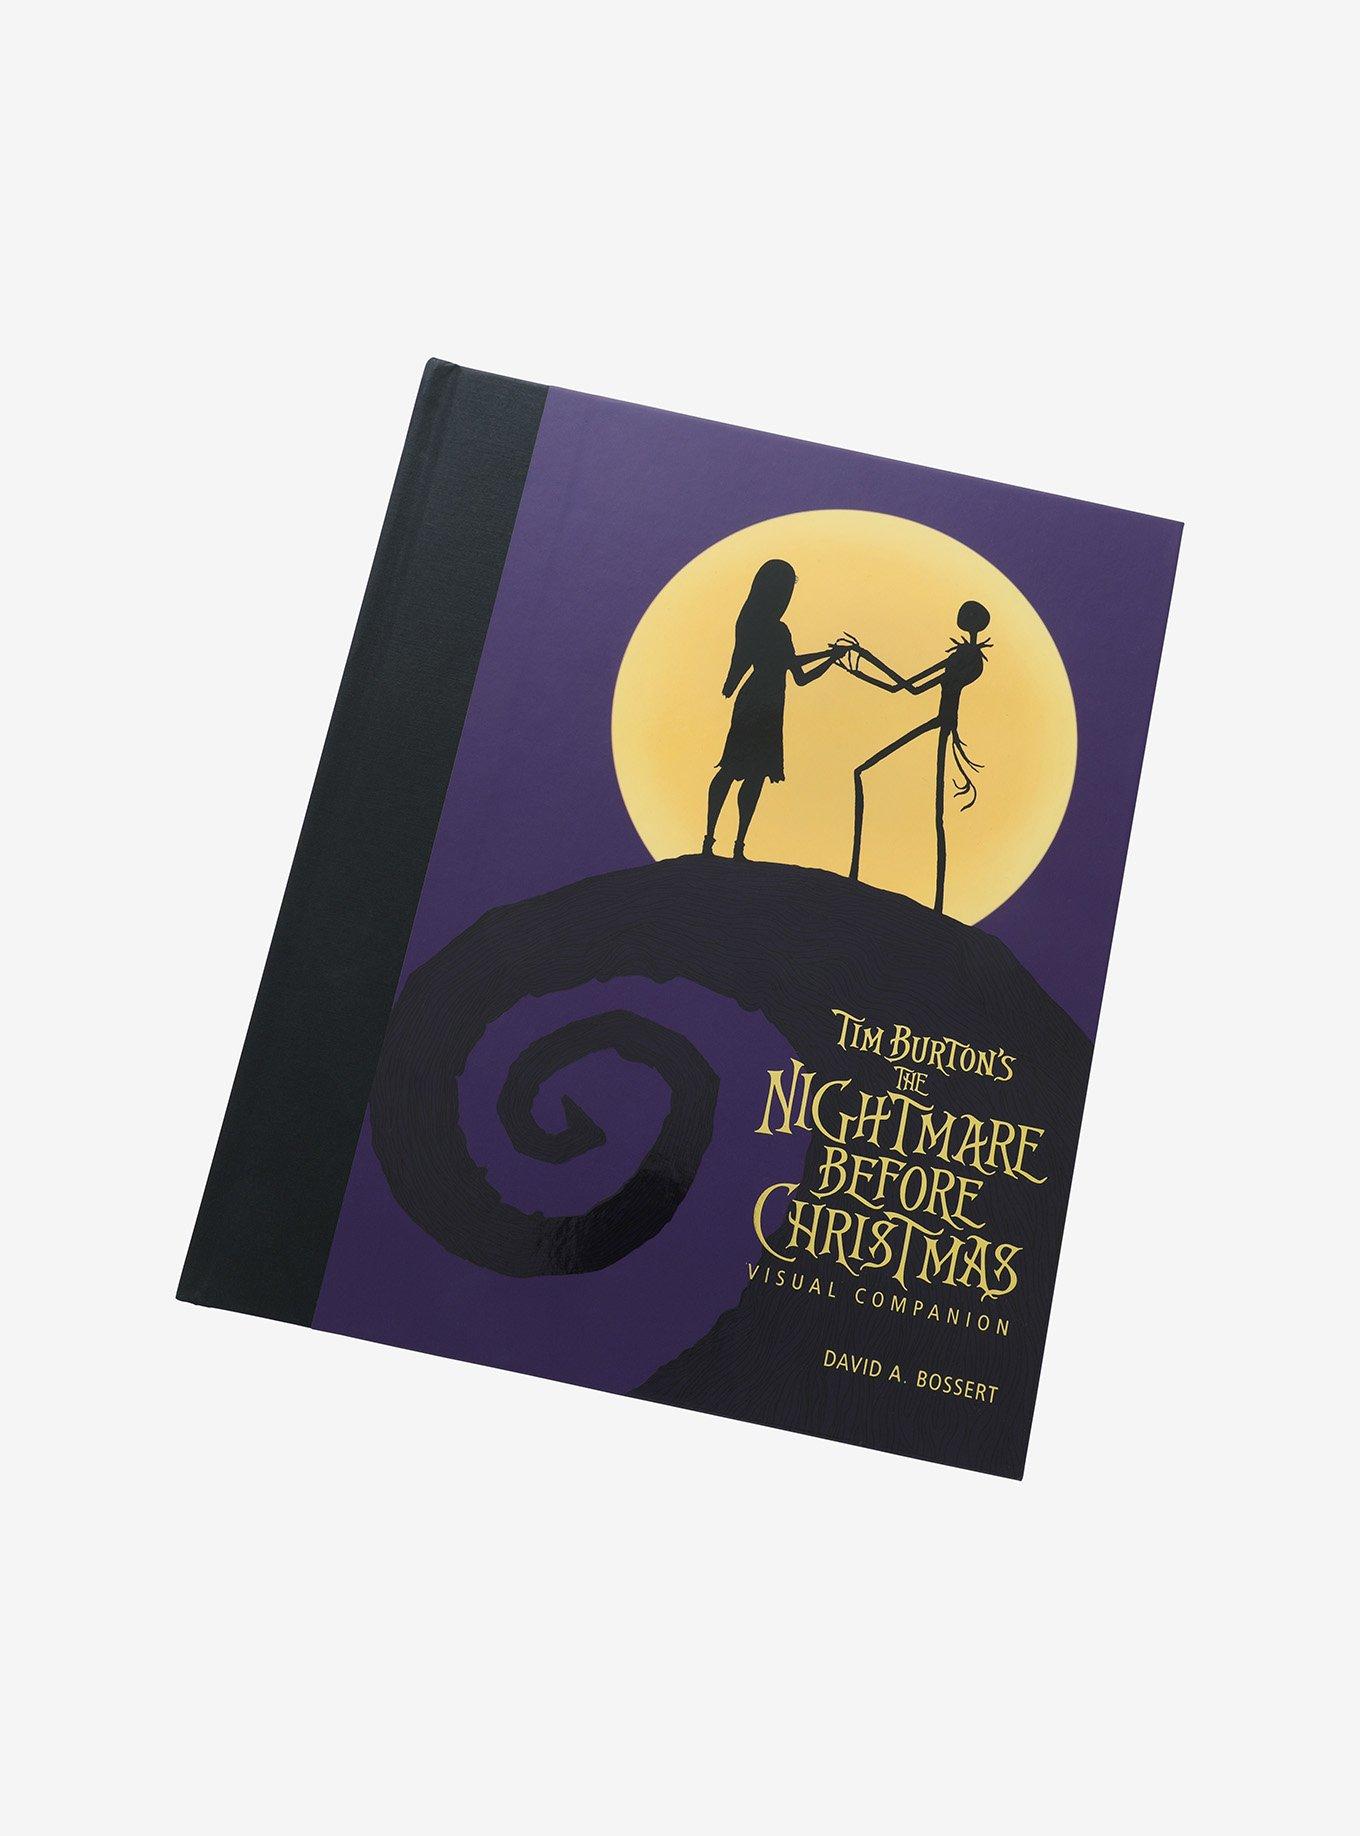 The Nightmare Before Christmas Book Review - Snapshots & Adventures